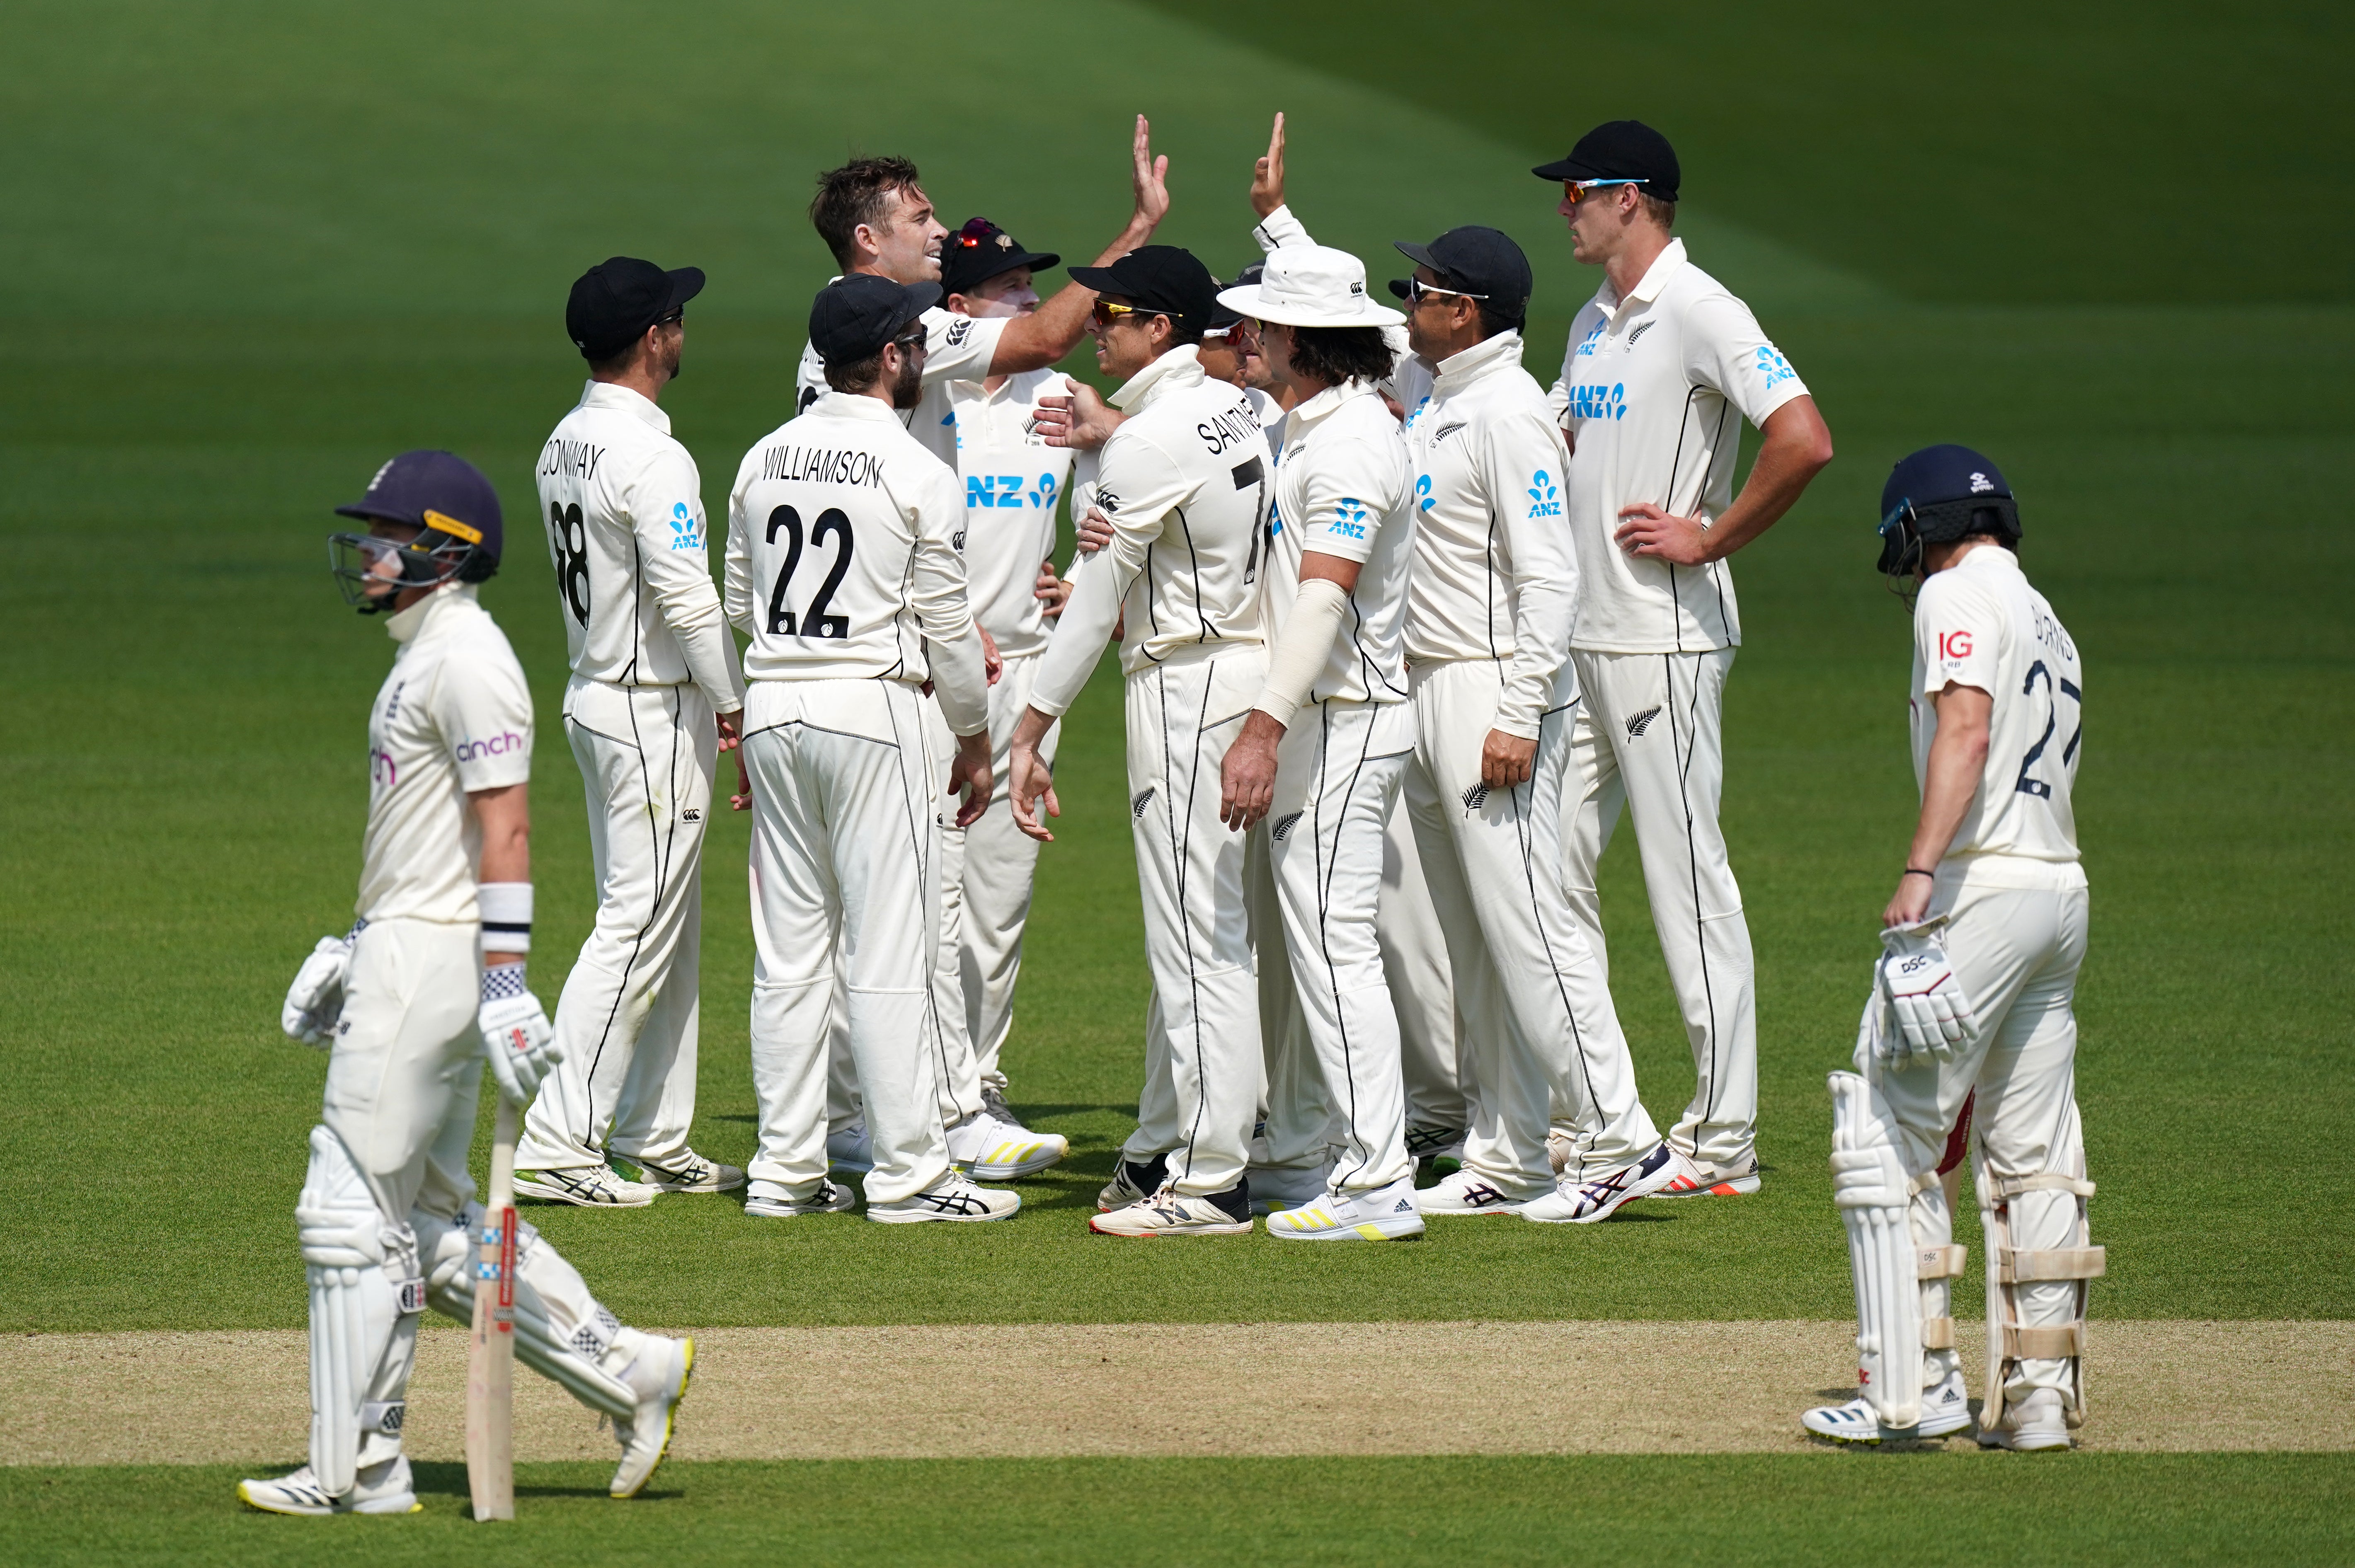 New Zealand celebrate the wicket of Ollie Pope